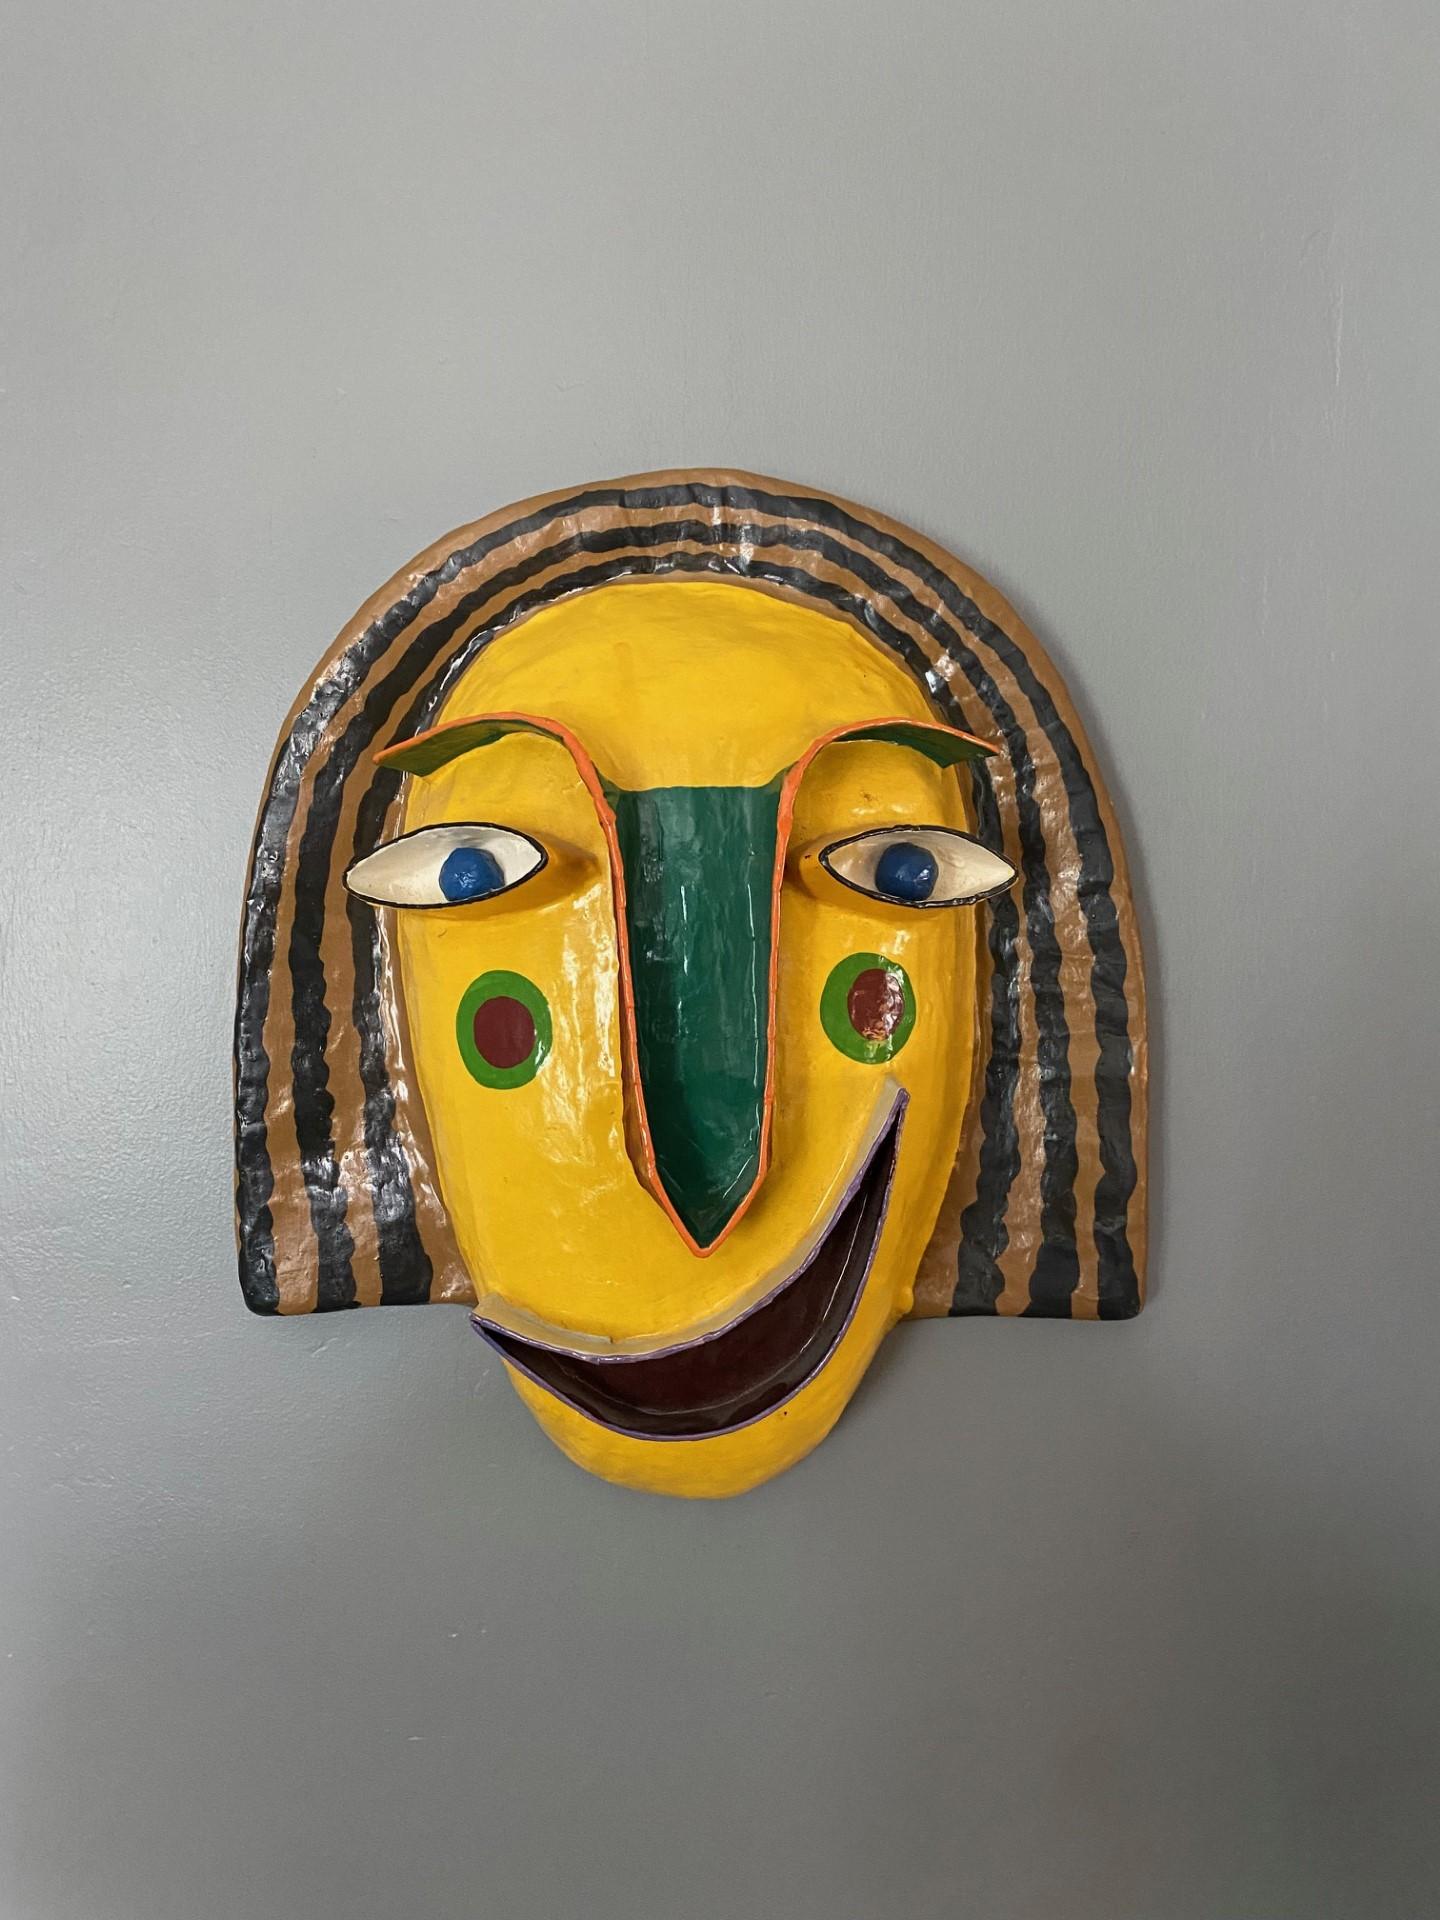 Beautiful and colorful sculpture constructed in papier mache.  This incredible piece is full of expression.  Reminiscent of papier mache sculptures by Sergio Bustamante, this piece blends in with post modern notes in a memphis-like era presence.